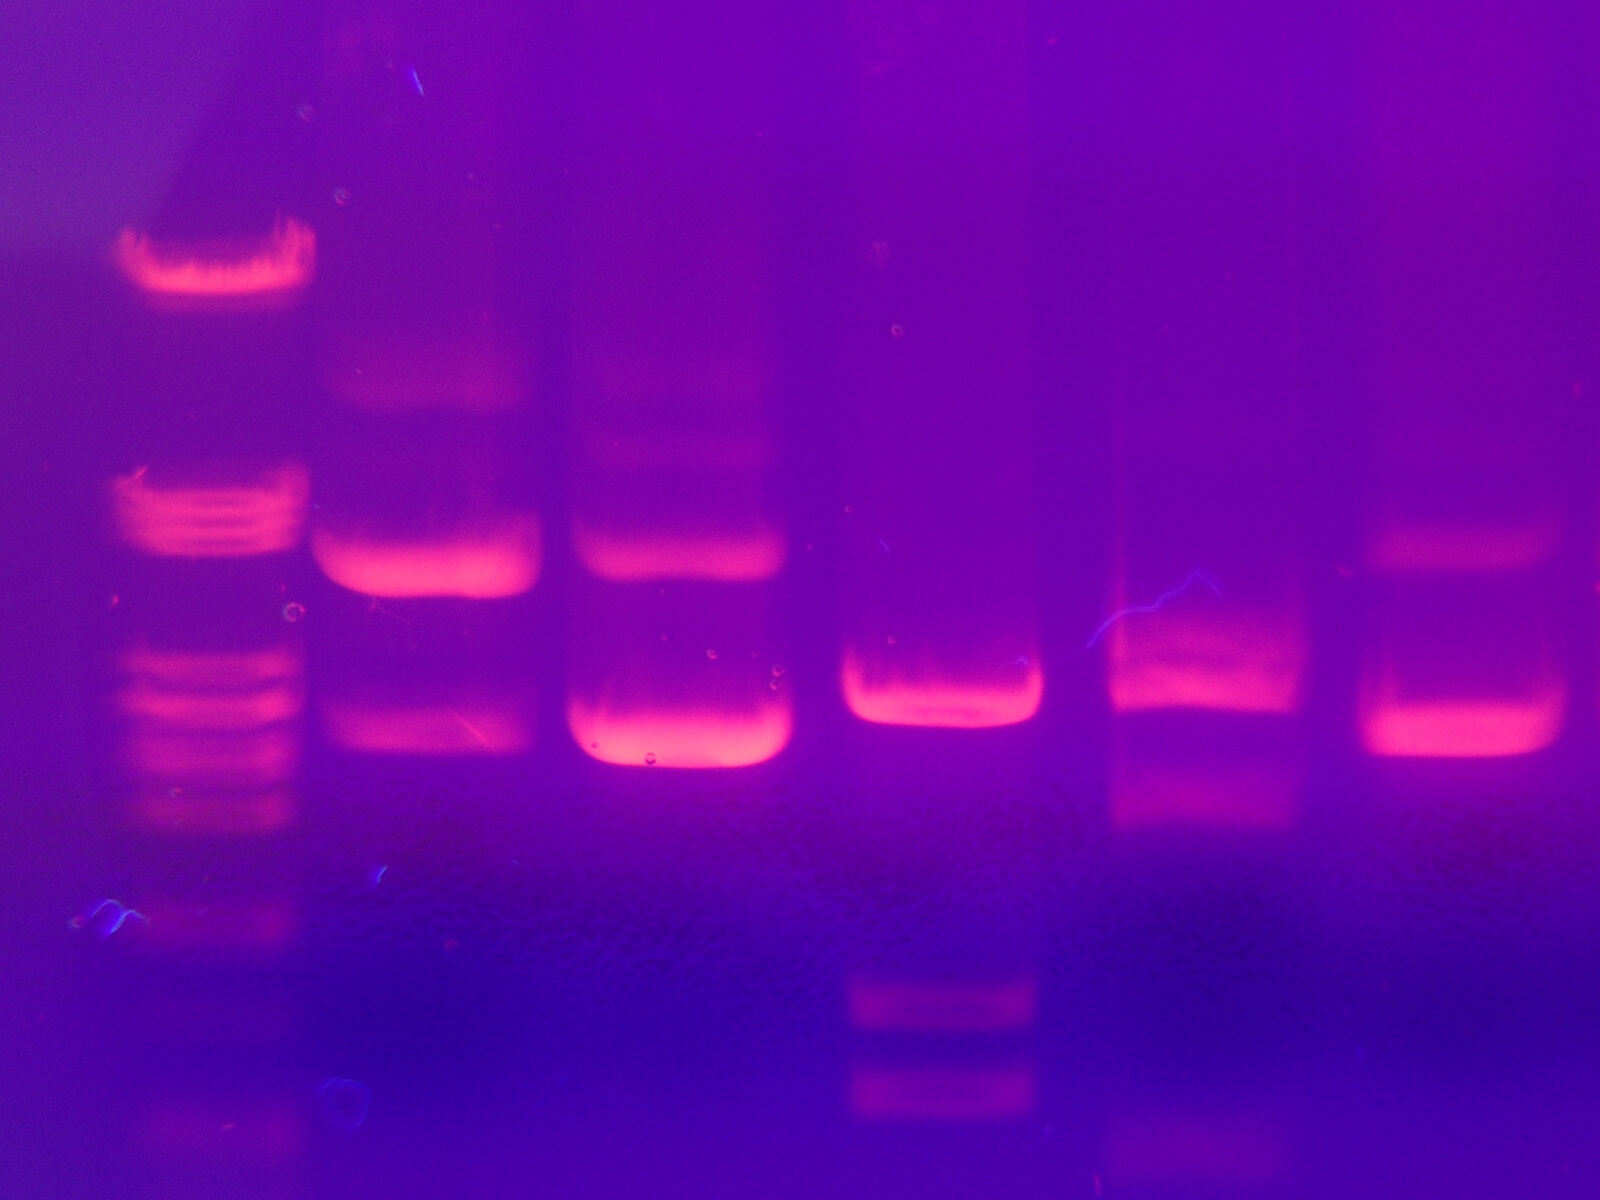 band of DNA visible in a gel electrophoresis experiment